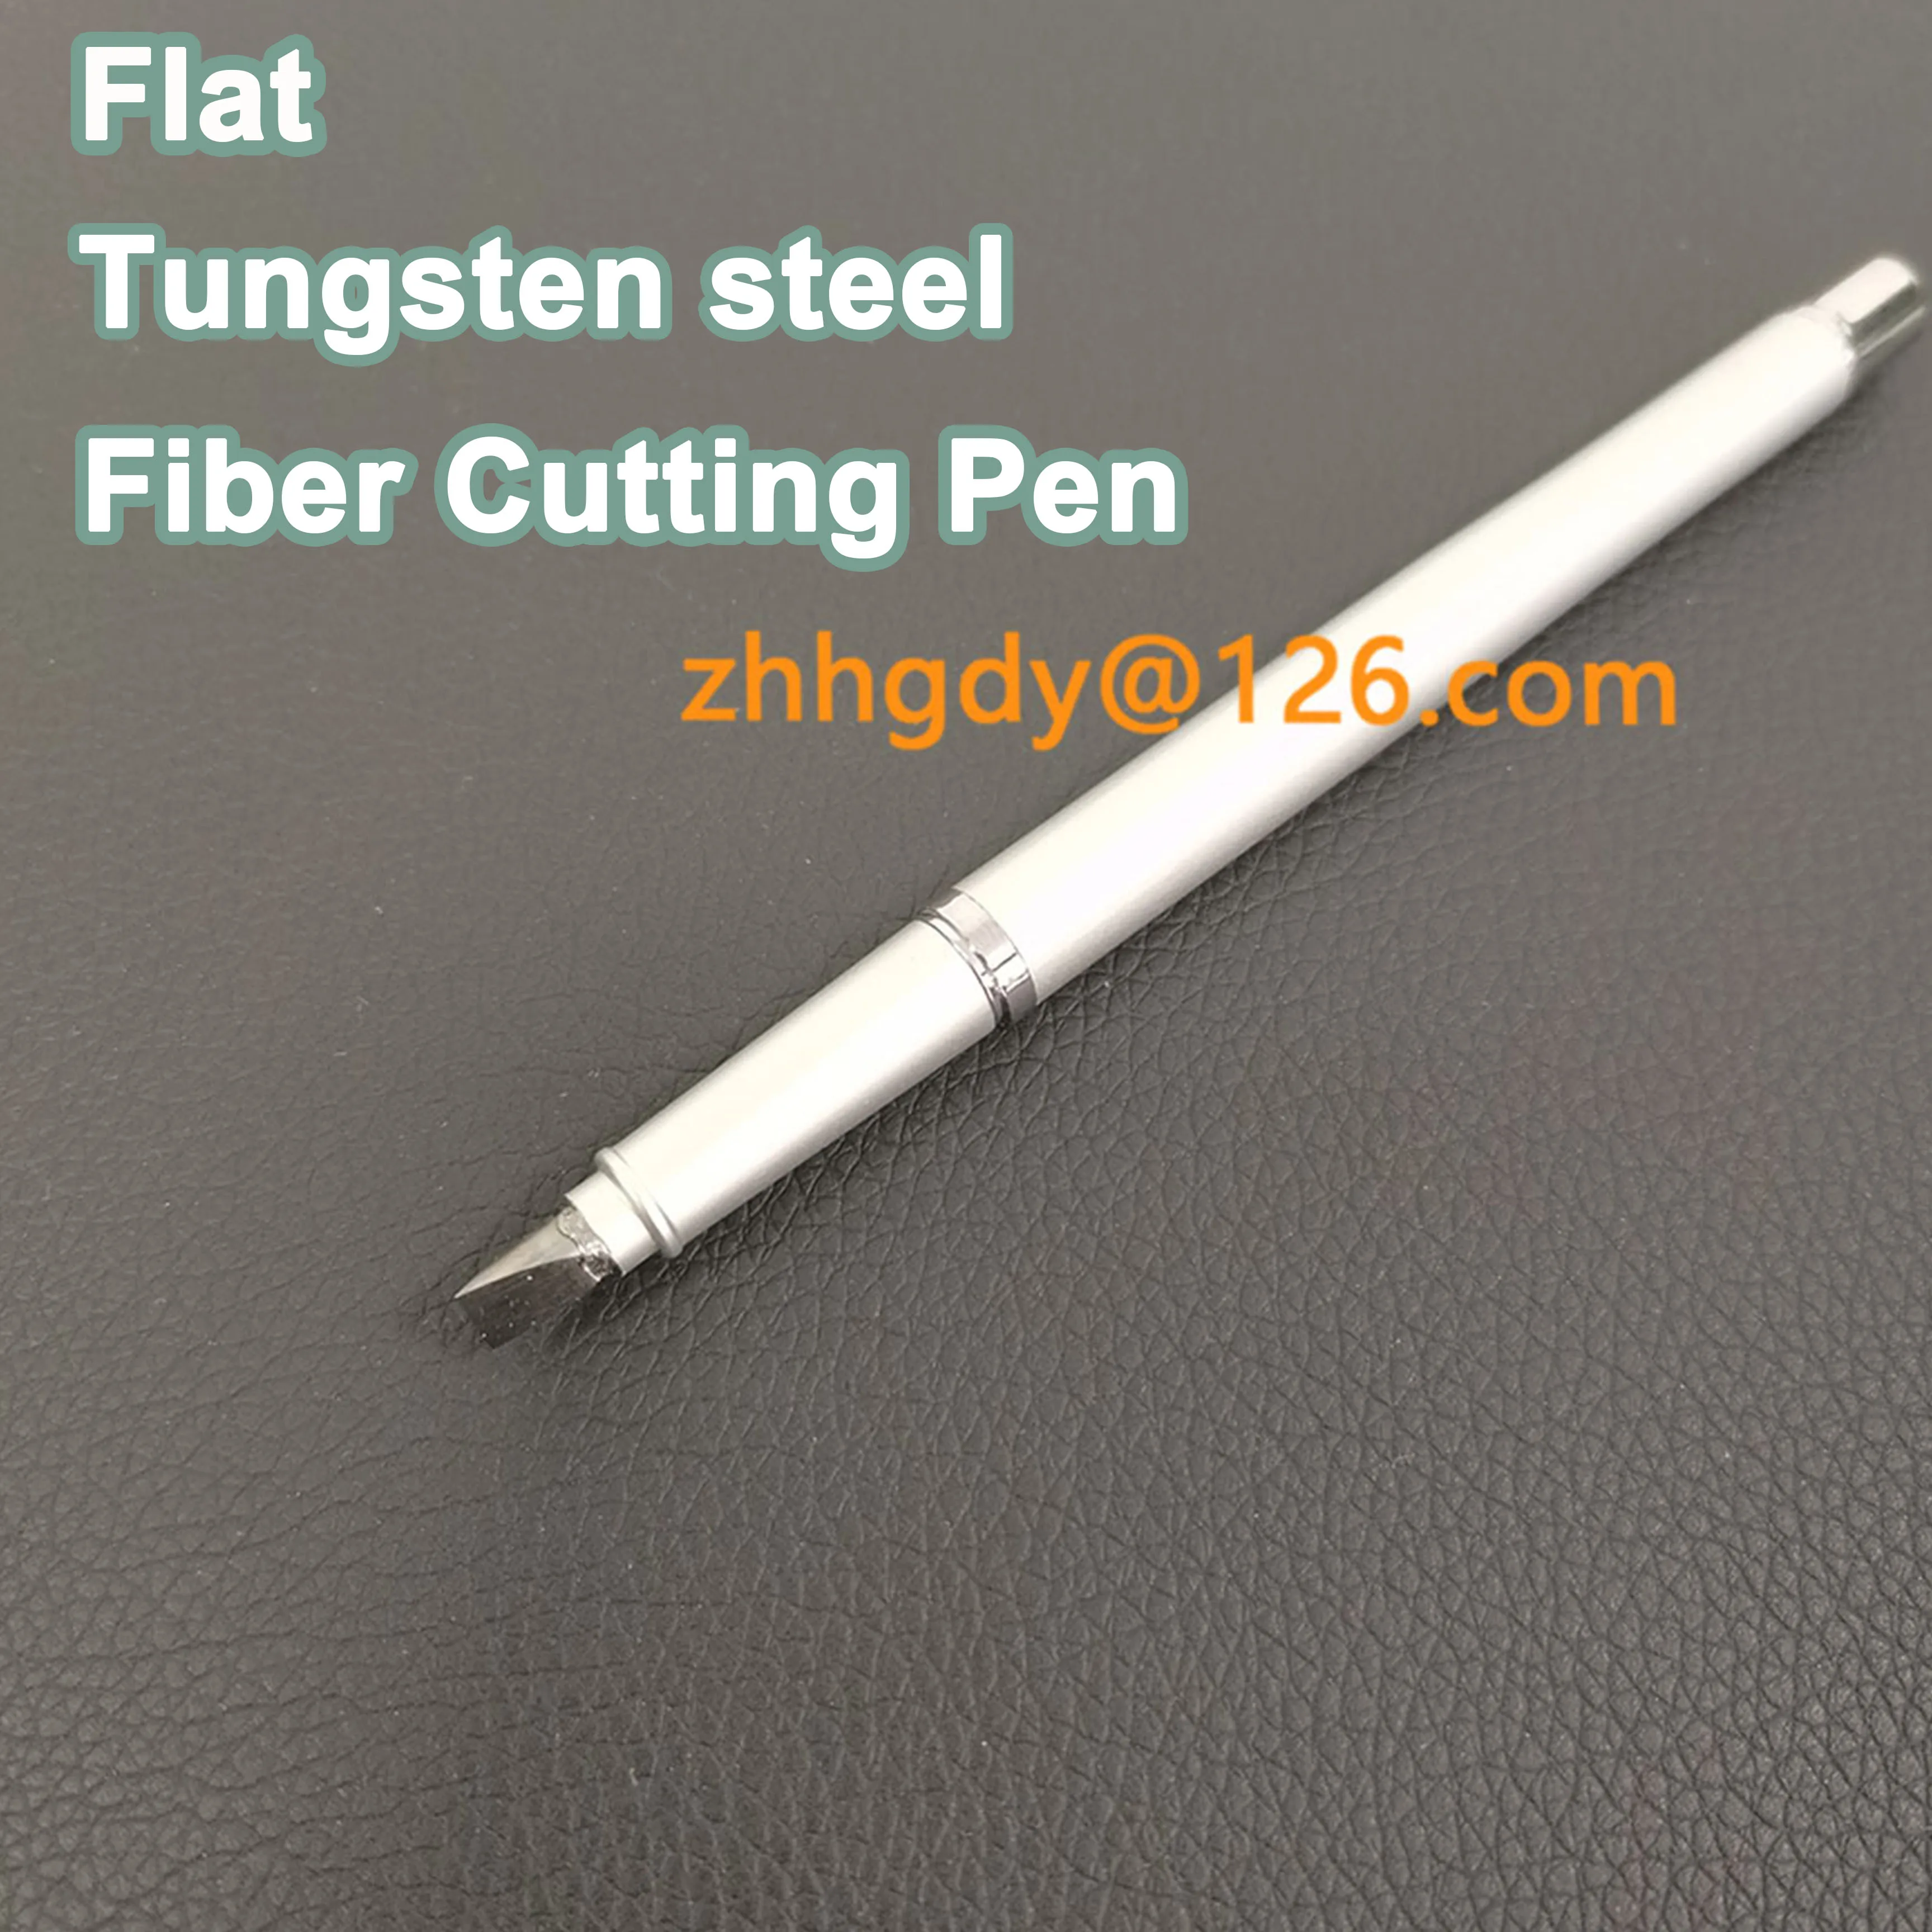 Flat mouth tungsten steel pen type fiber cleaver Fiber cleaving pen Fiber scriber Fiber cleaving pen dw3080 raise tungsten steel double sided flat drill d6x80 ° x40 1 t 80 ° 1 tooth double angle cutter